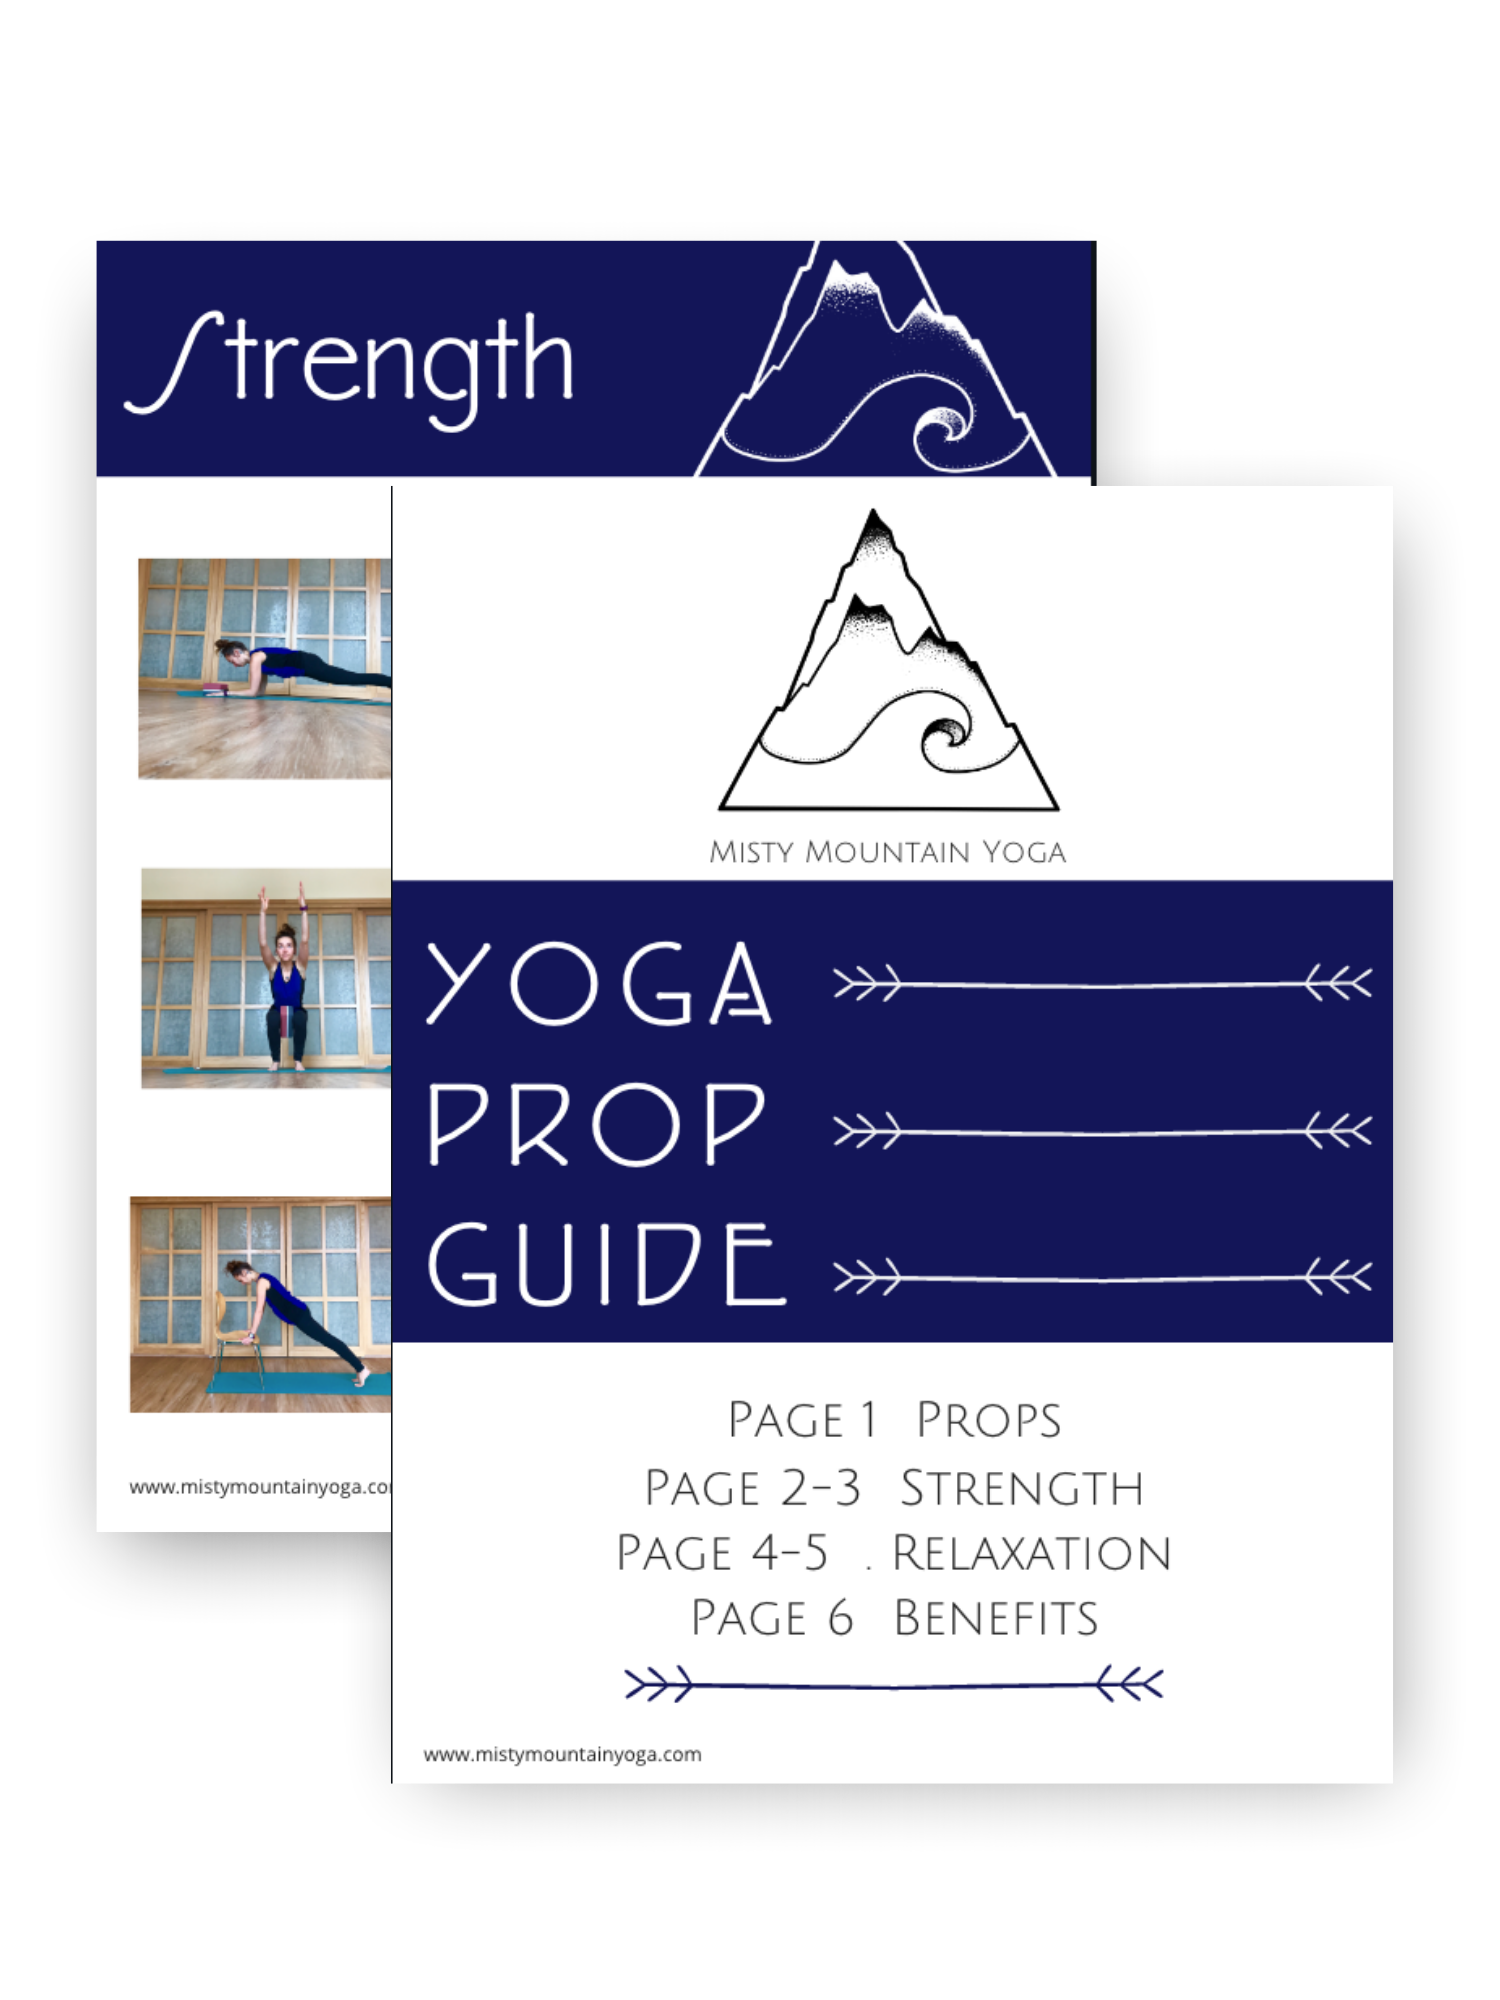 A Guide to Yoga Props for Beginners